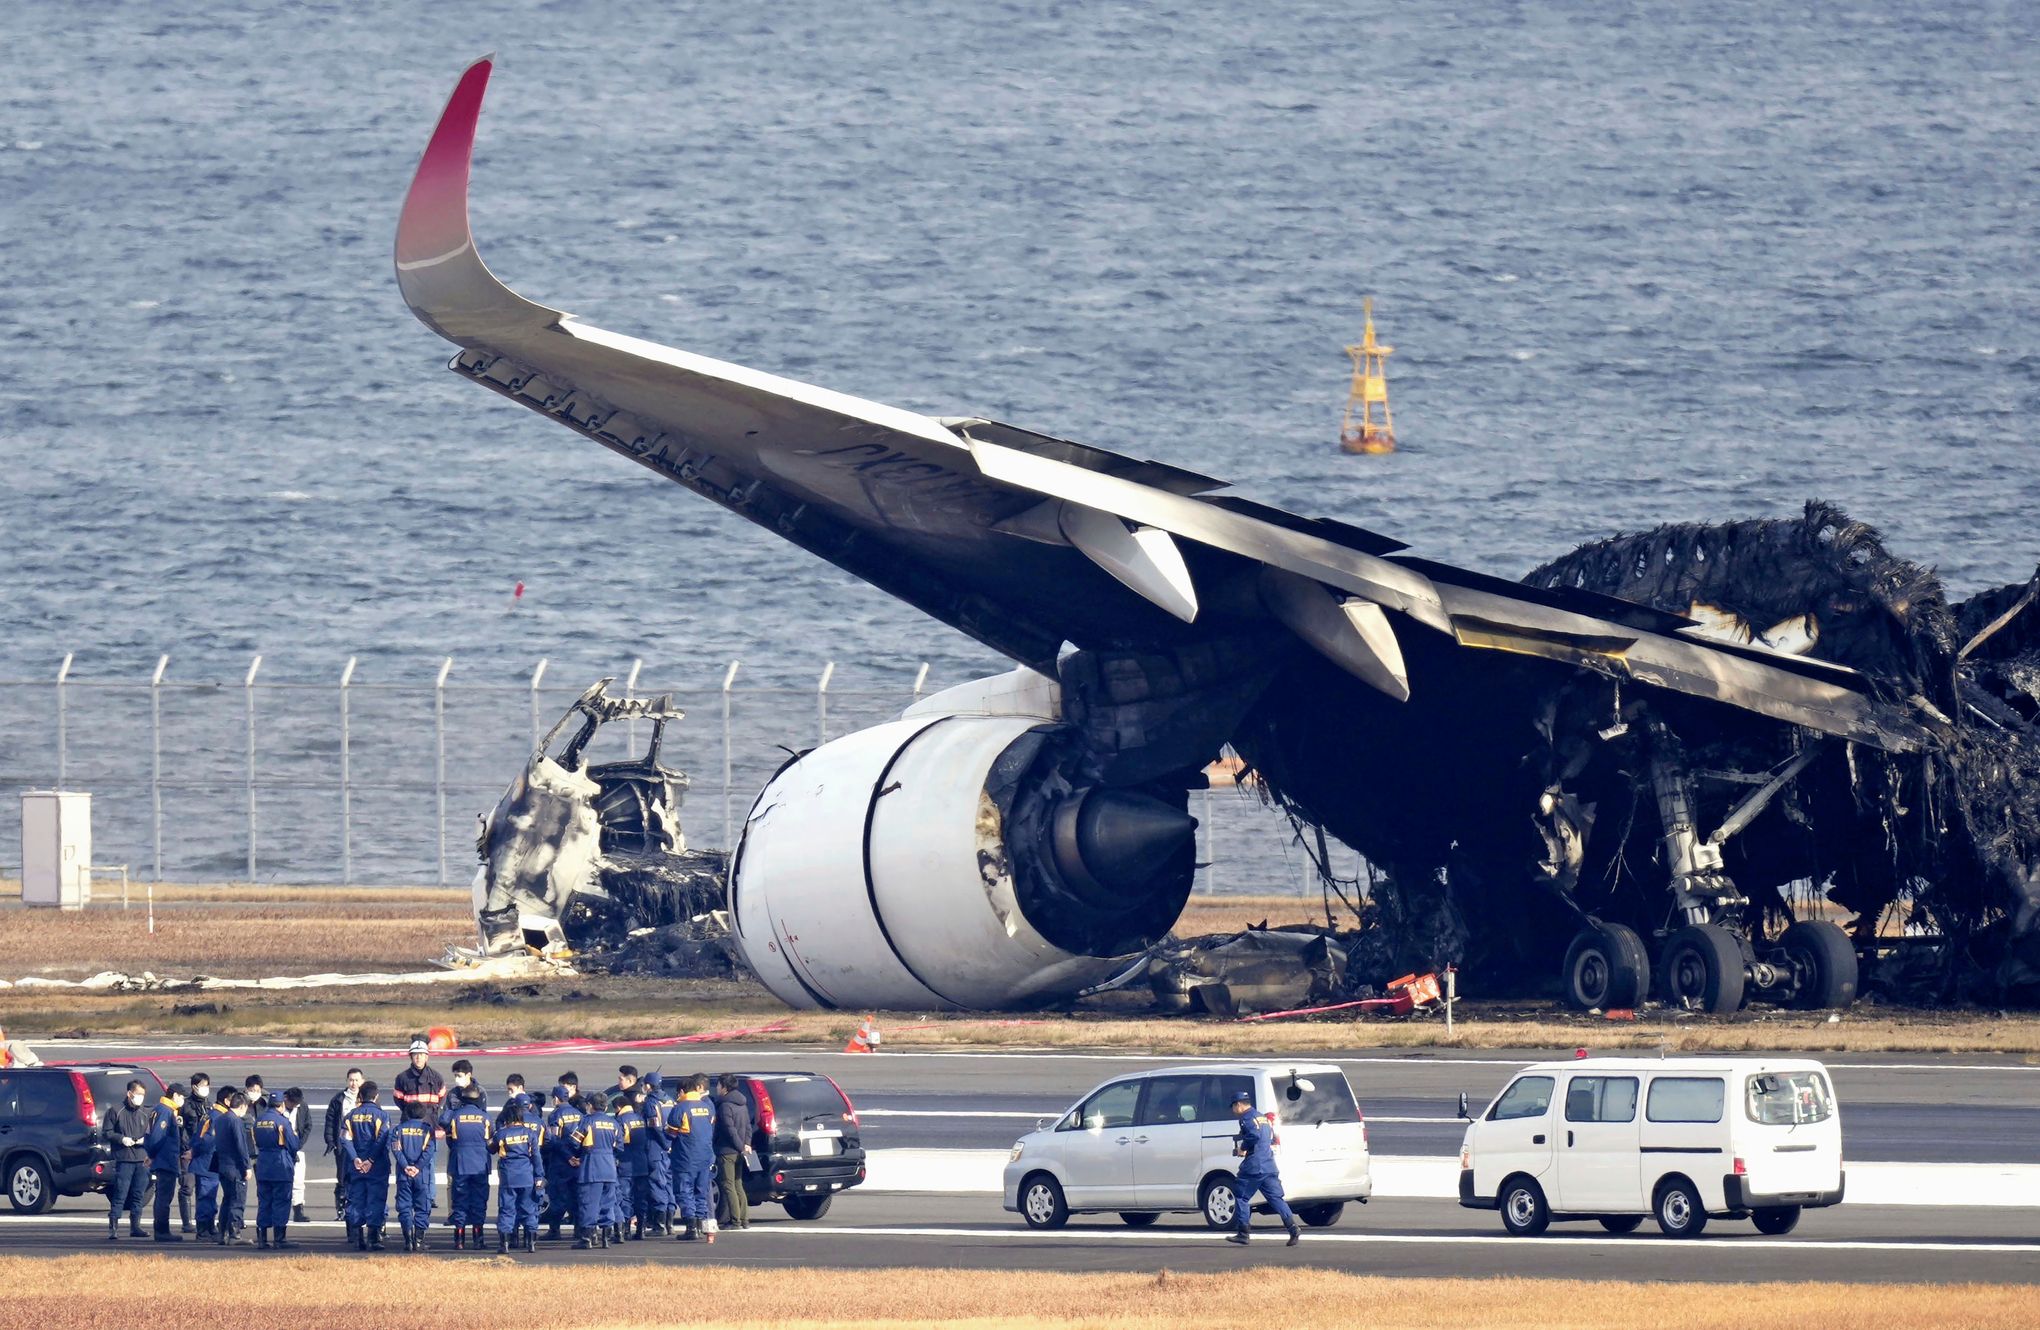 Surviving Engine Separation - The Unusual Story of Japan Airlines